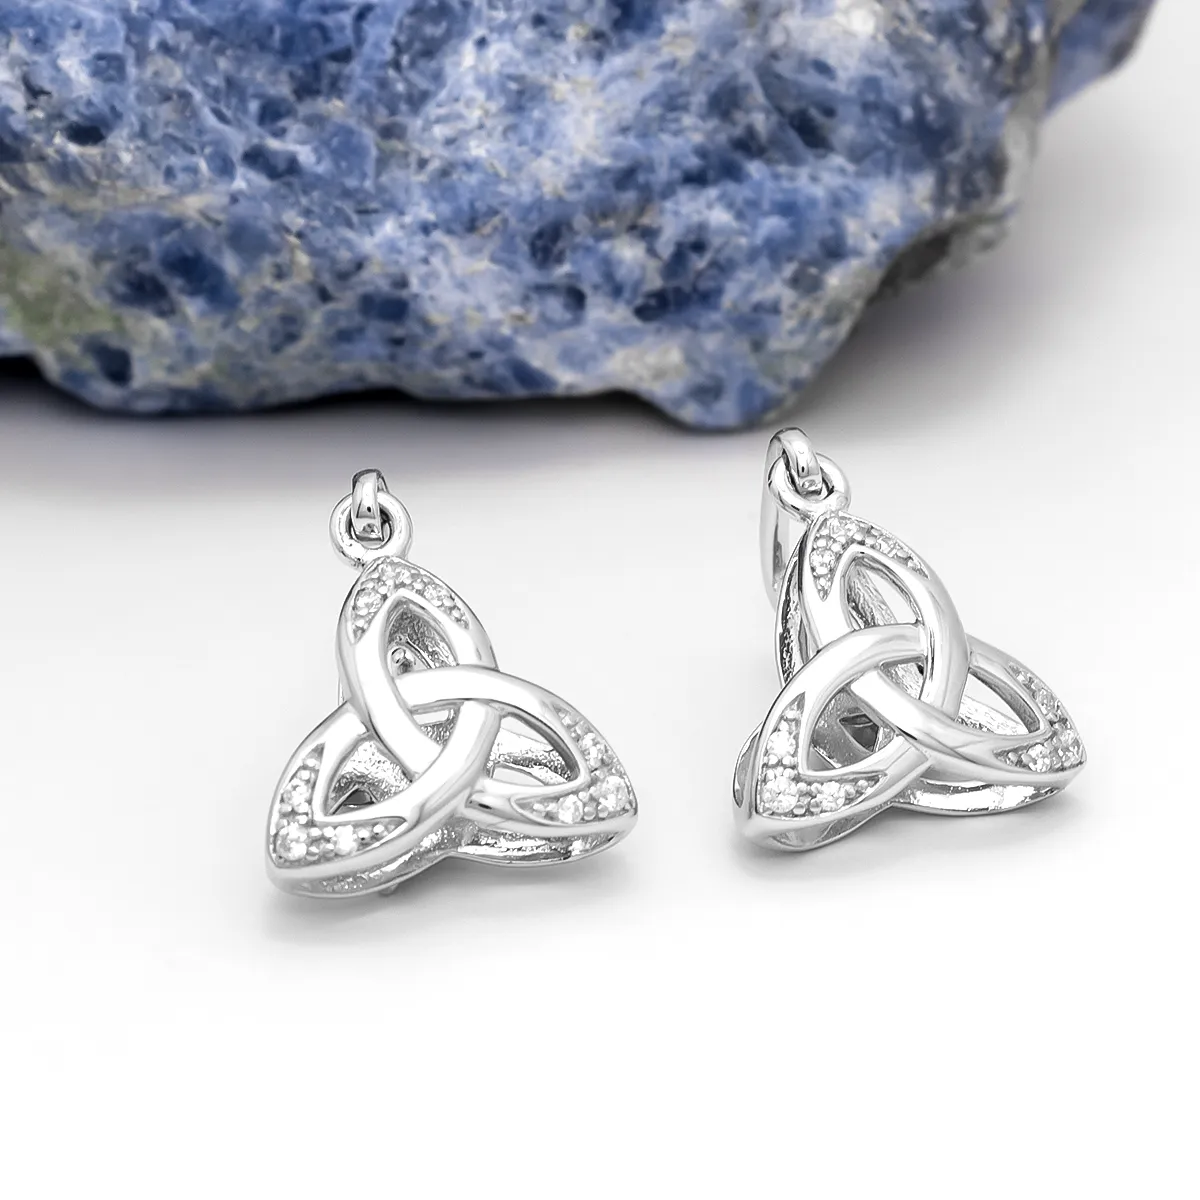 Silver Trinity Knot Earrings with Cubic Zirconia